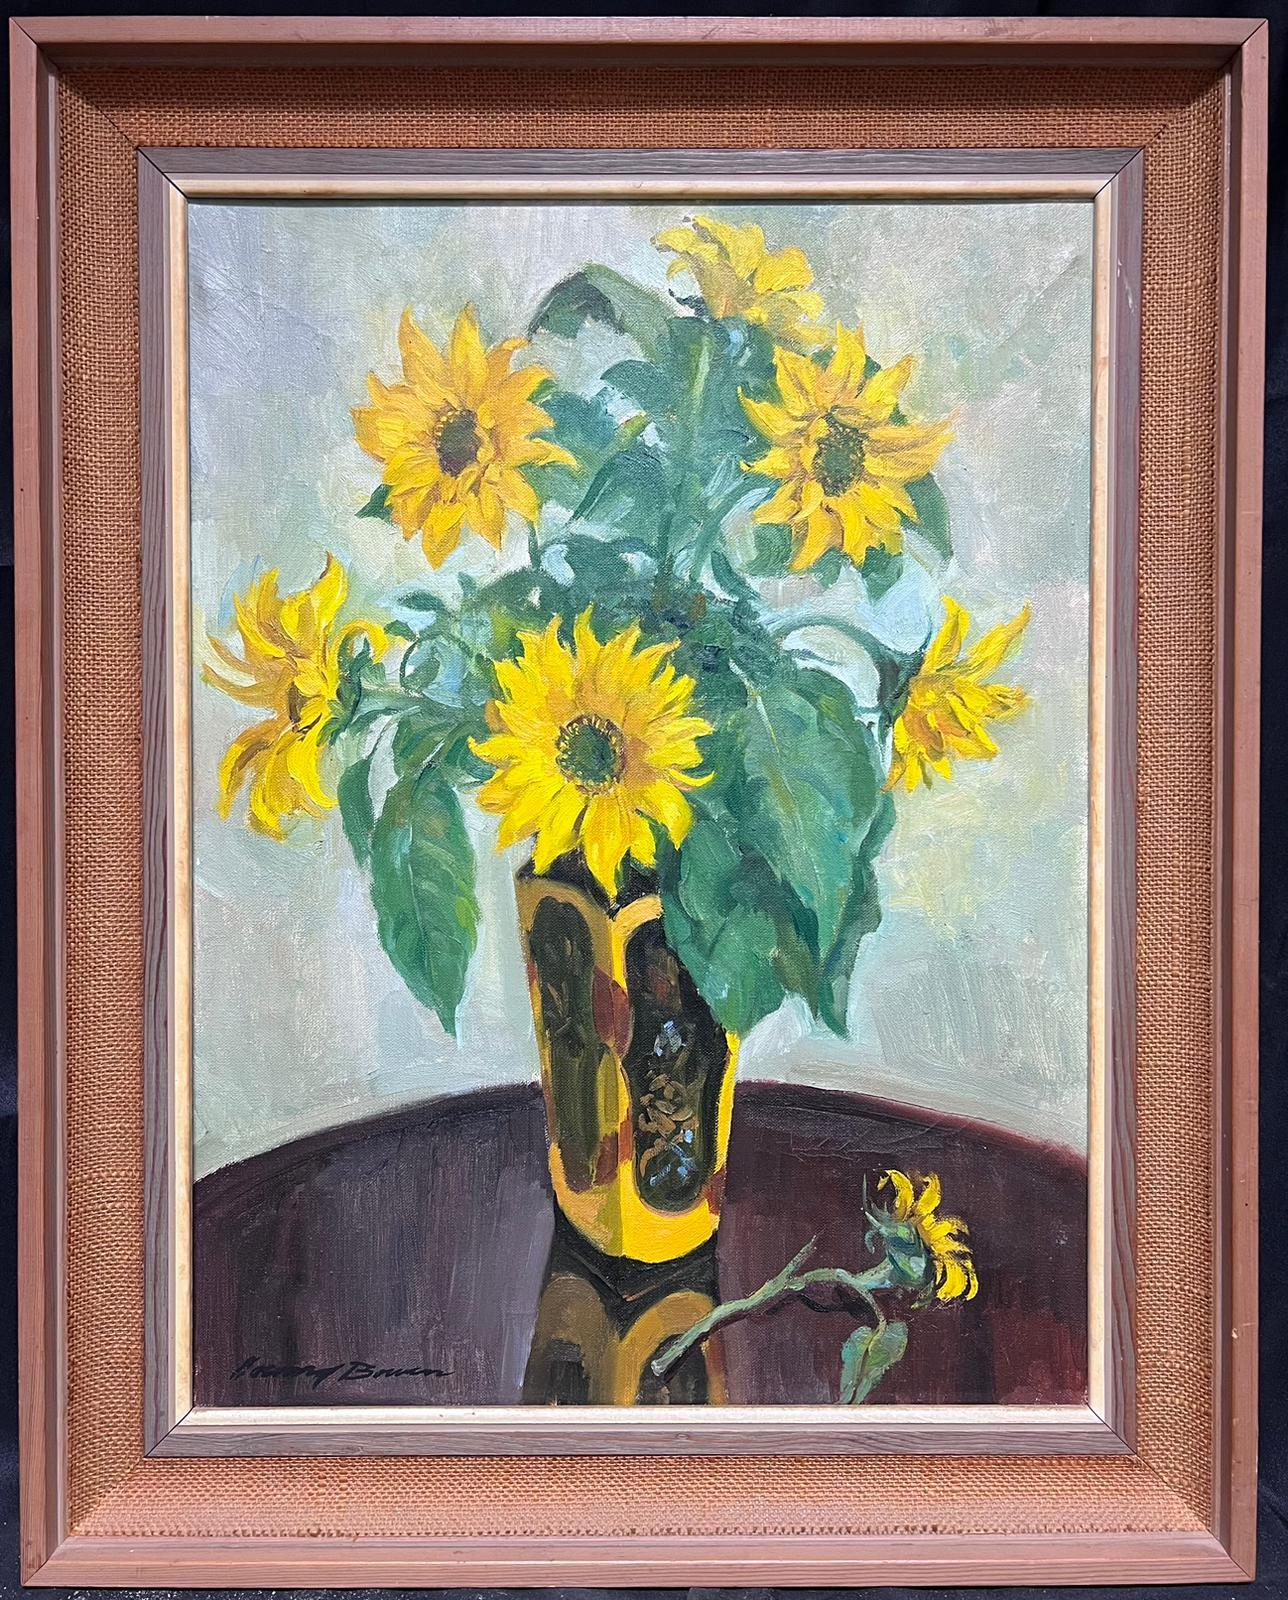 Mid 20th Century English Impressionist Still-Life Painting - Sunflowers in Vase 1950's English Impressionist Signed Oil Painting on Canvas